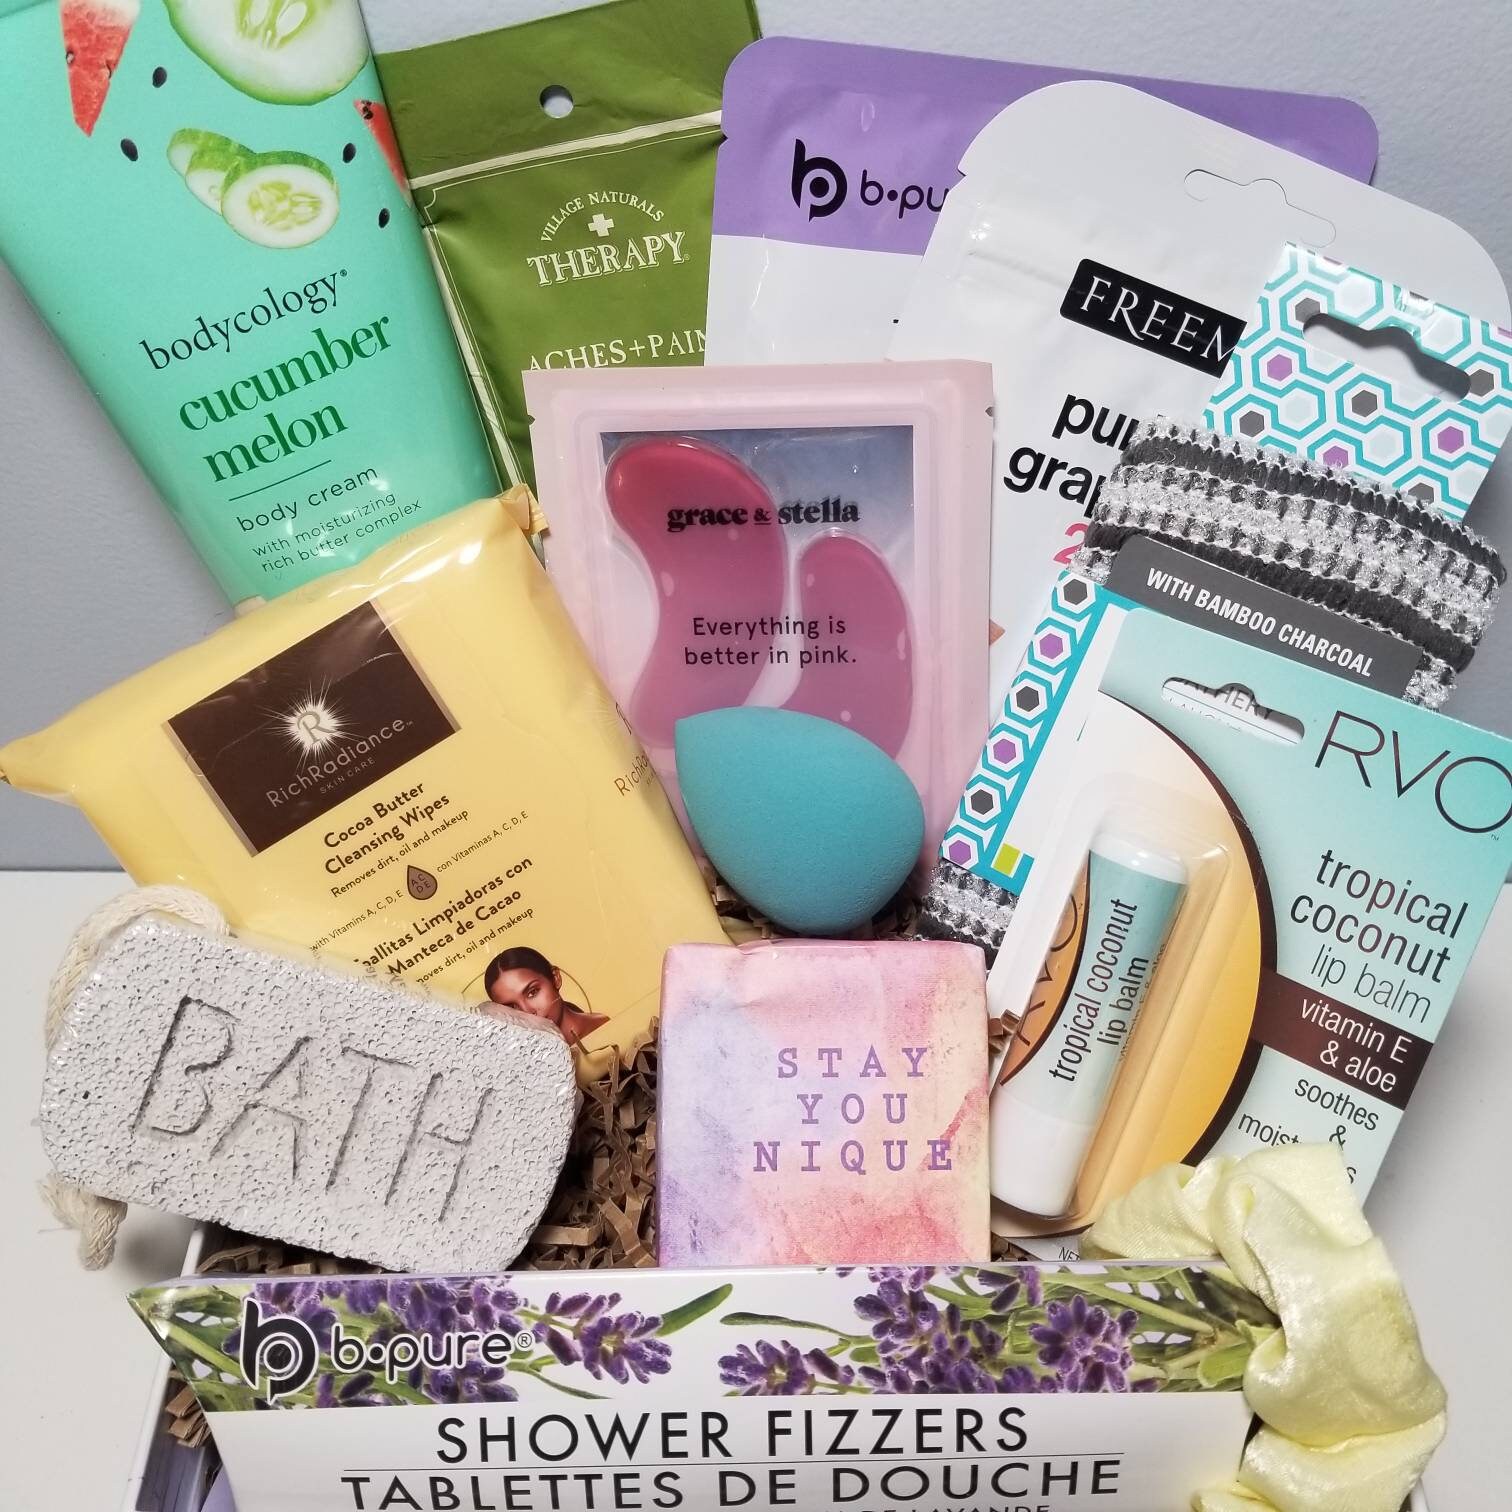 Pamper Gift Box Treat Your Loved One to a Spa Kit to Help Them Relax Over  10 Beauty Products Including Face & Eye Masks 